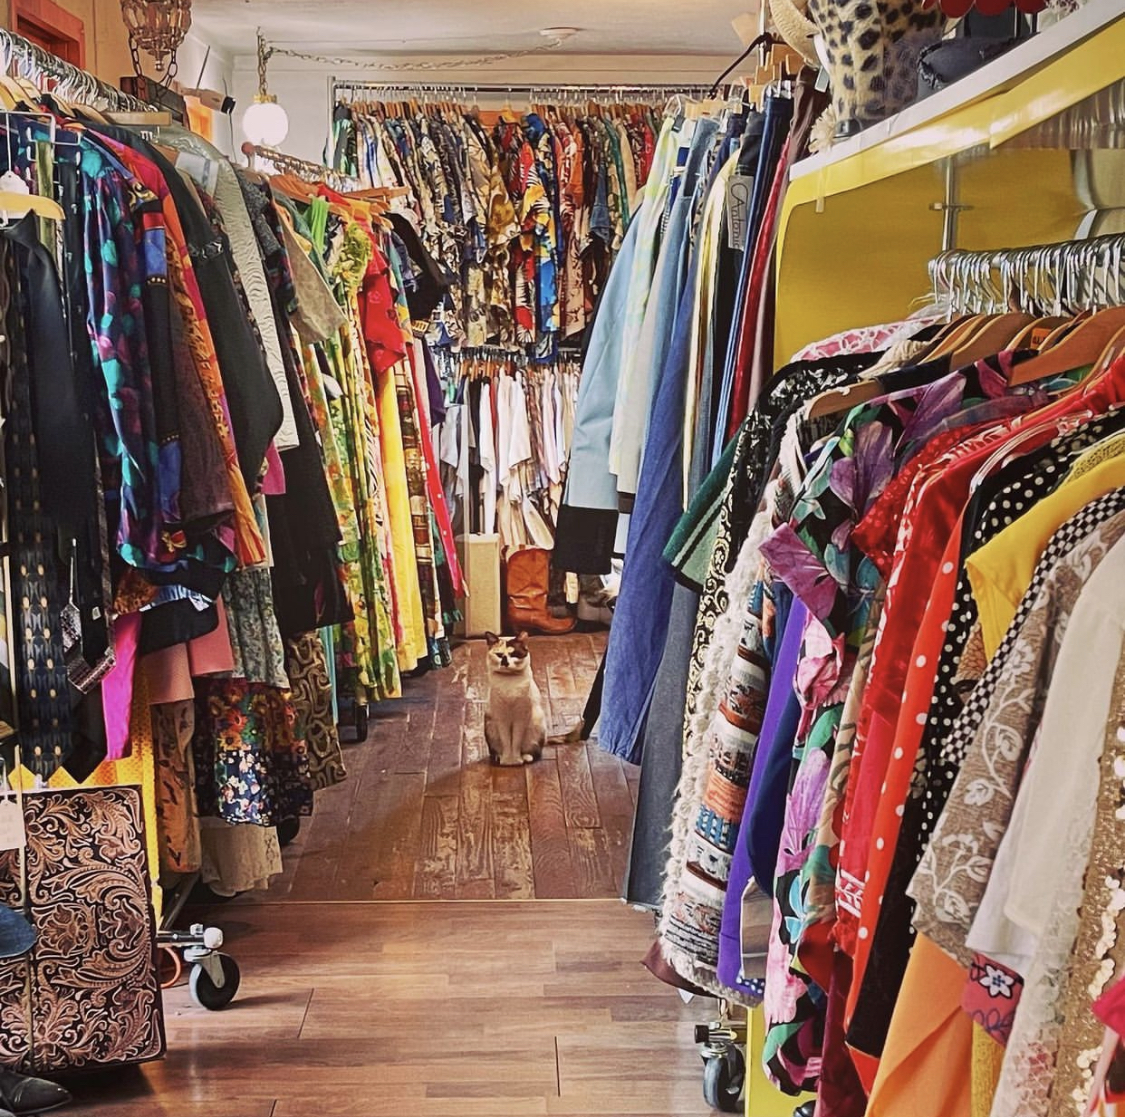 A photo of a vintage boutigue, full of racks with colorful clothes and a cat sitting on the wooden floor.